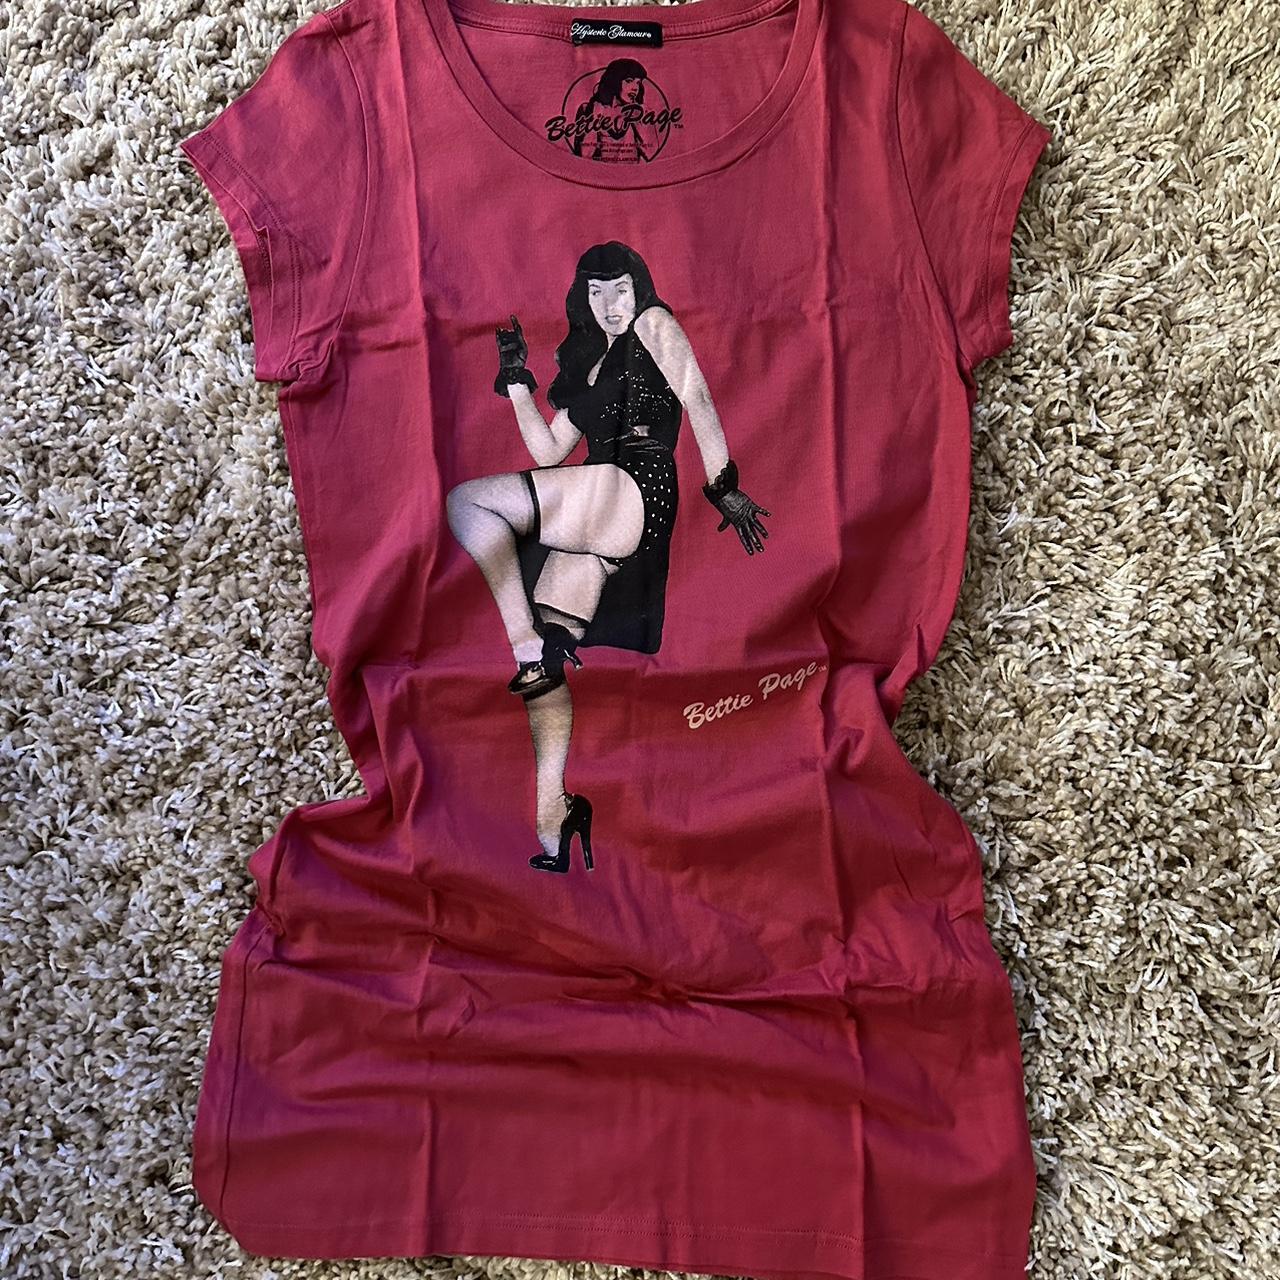 HYSTERIC GLAMOUR BETTY PAGE Tee X1535-